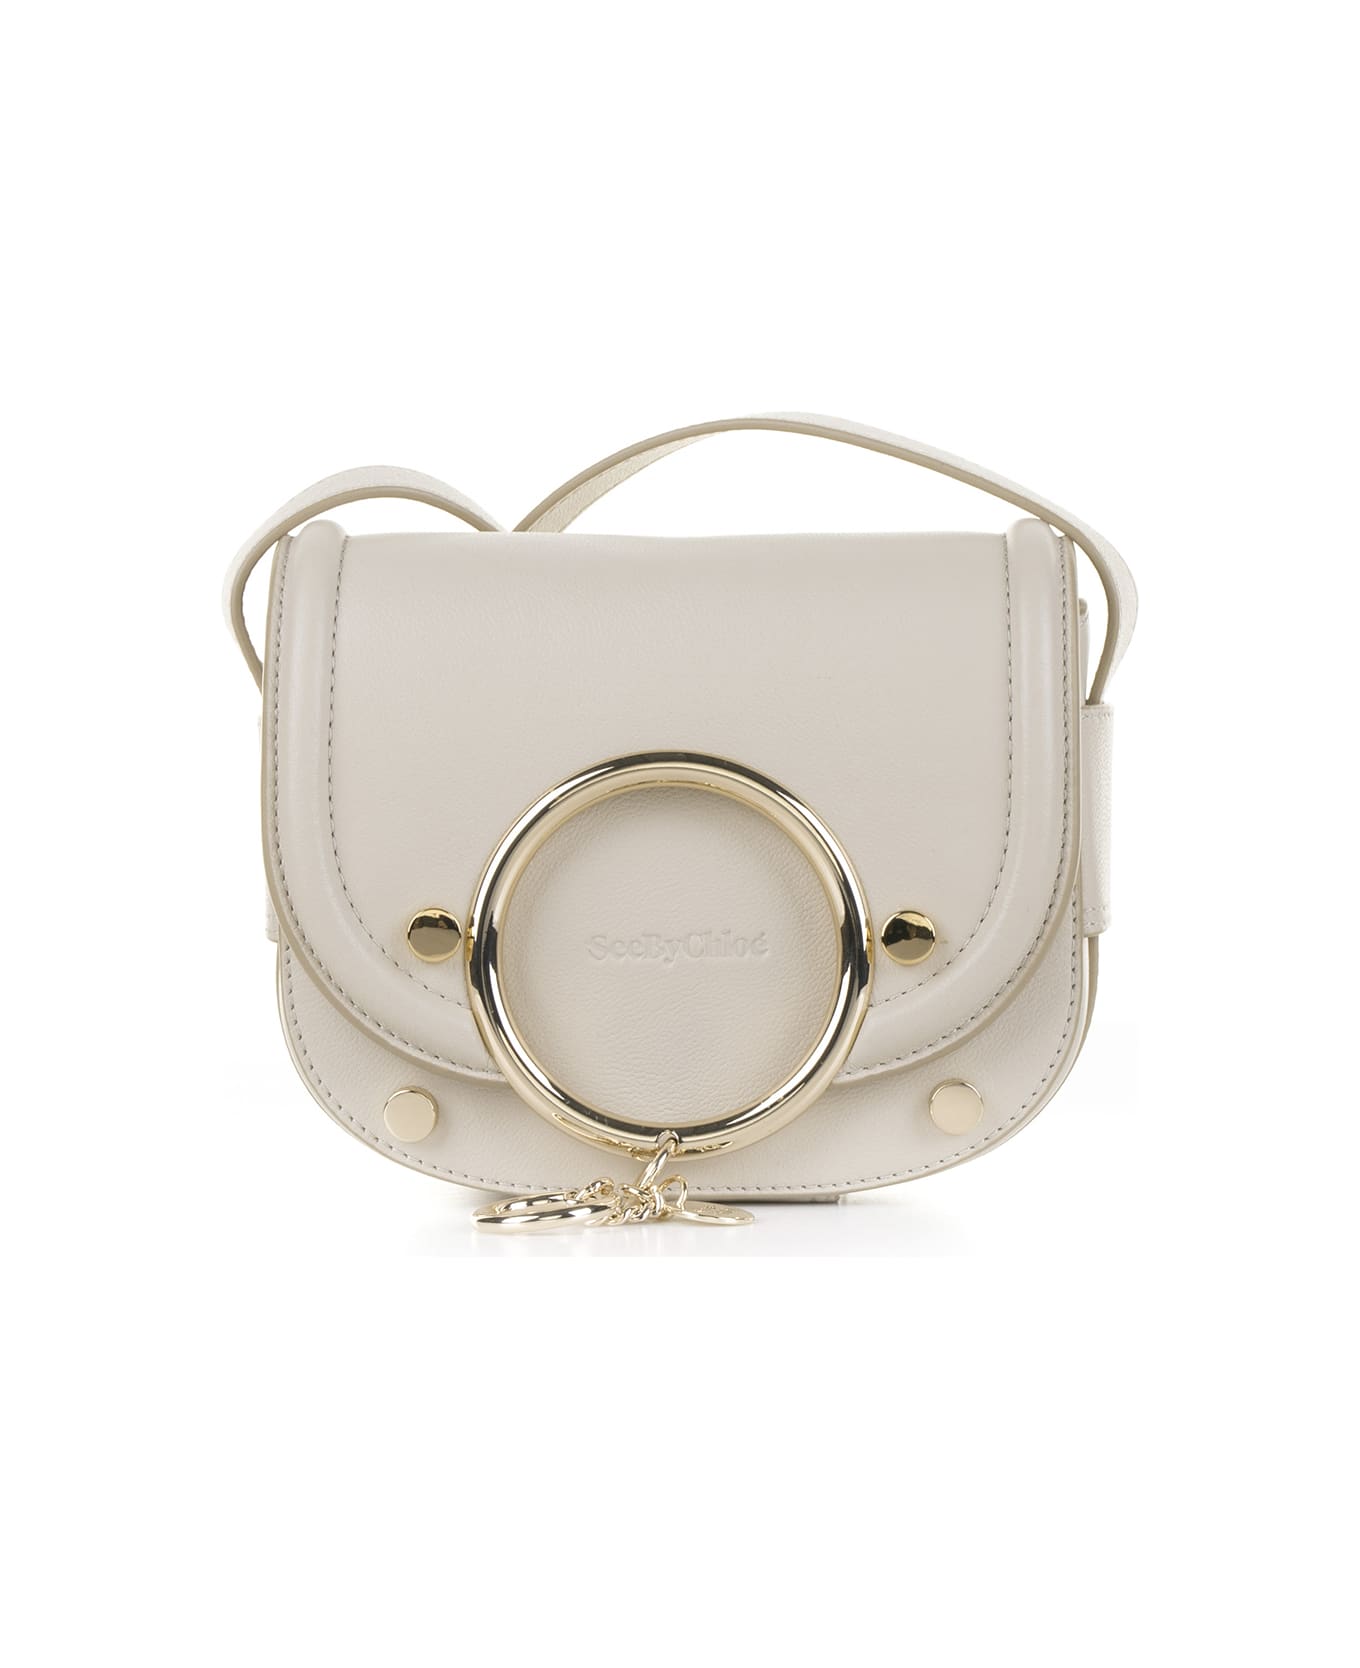 See by Chloé Shoulder Bag - CEMENT BEIGE トートバッグ